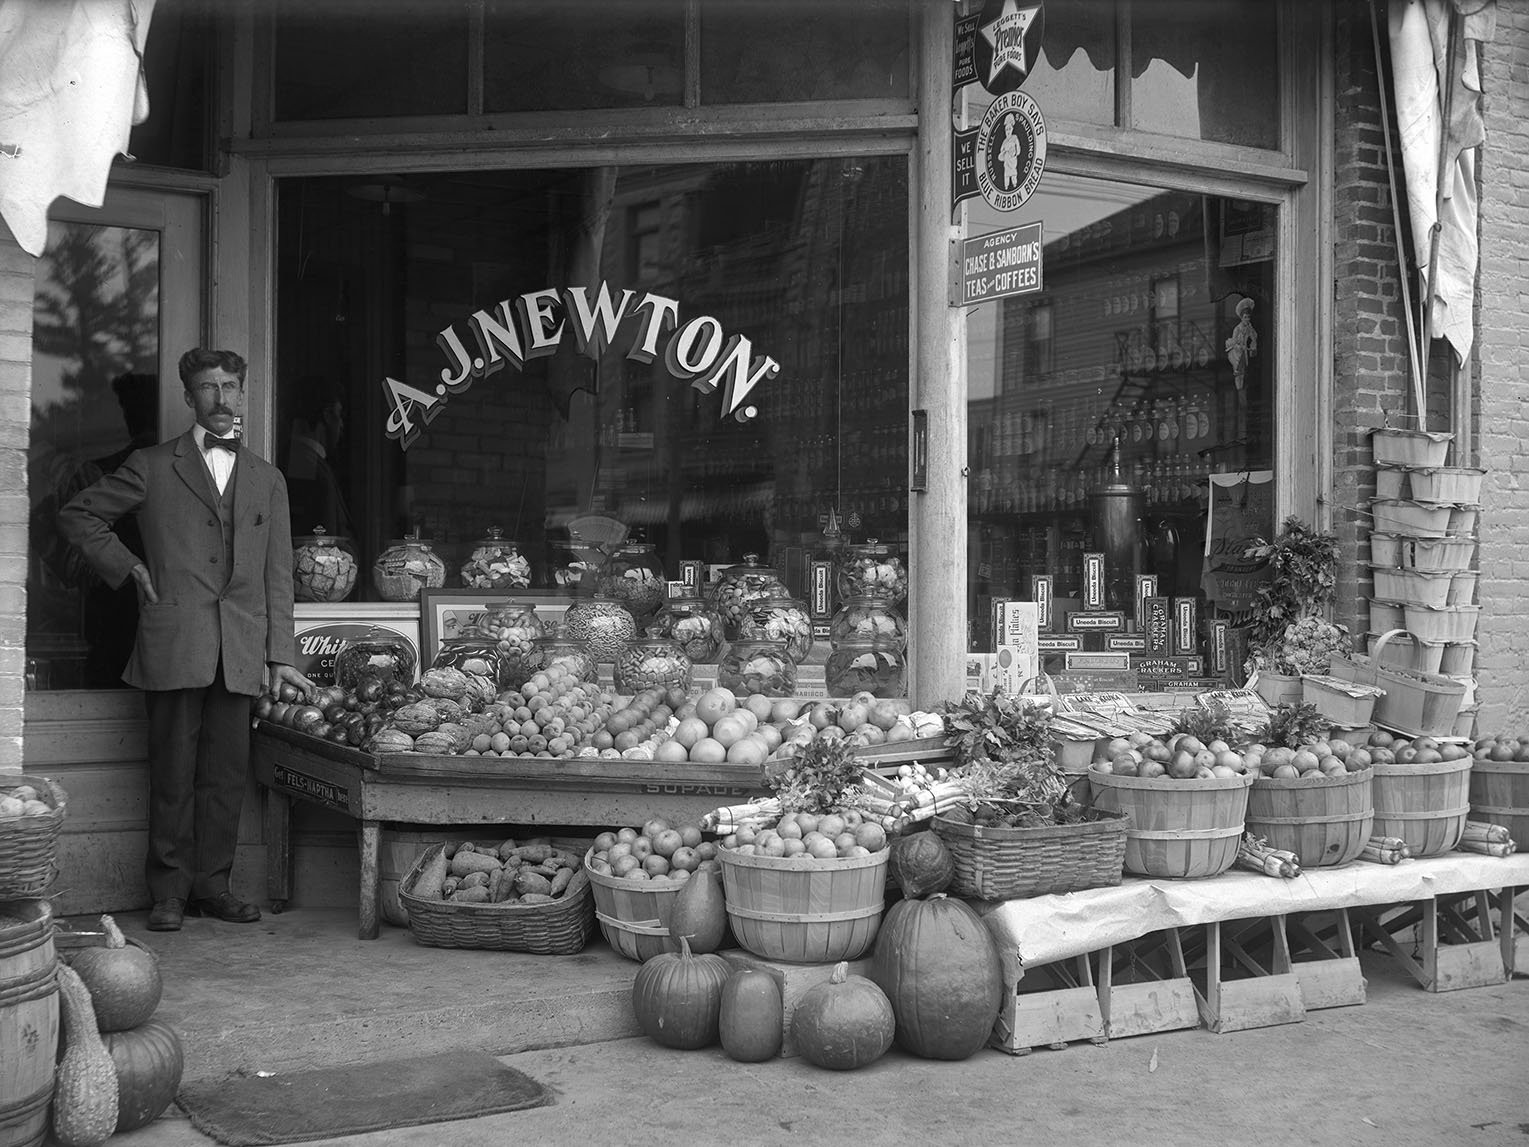 A. J. Newton grocery store, 1904